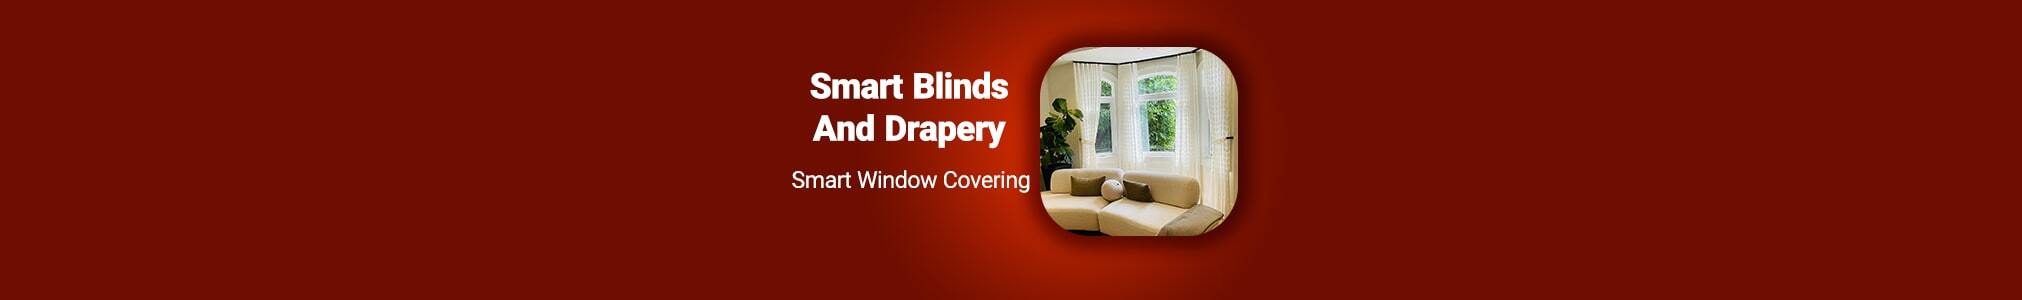 Smart Blinds and Drapery